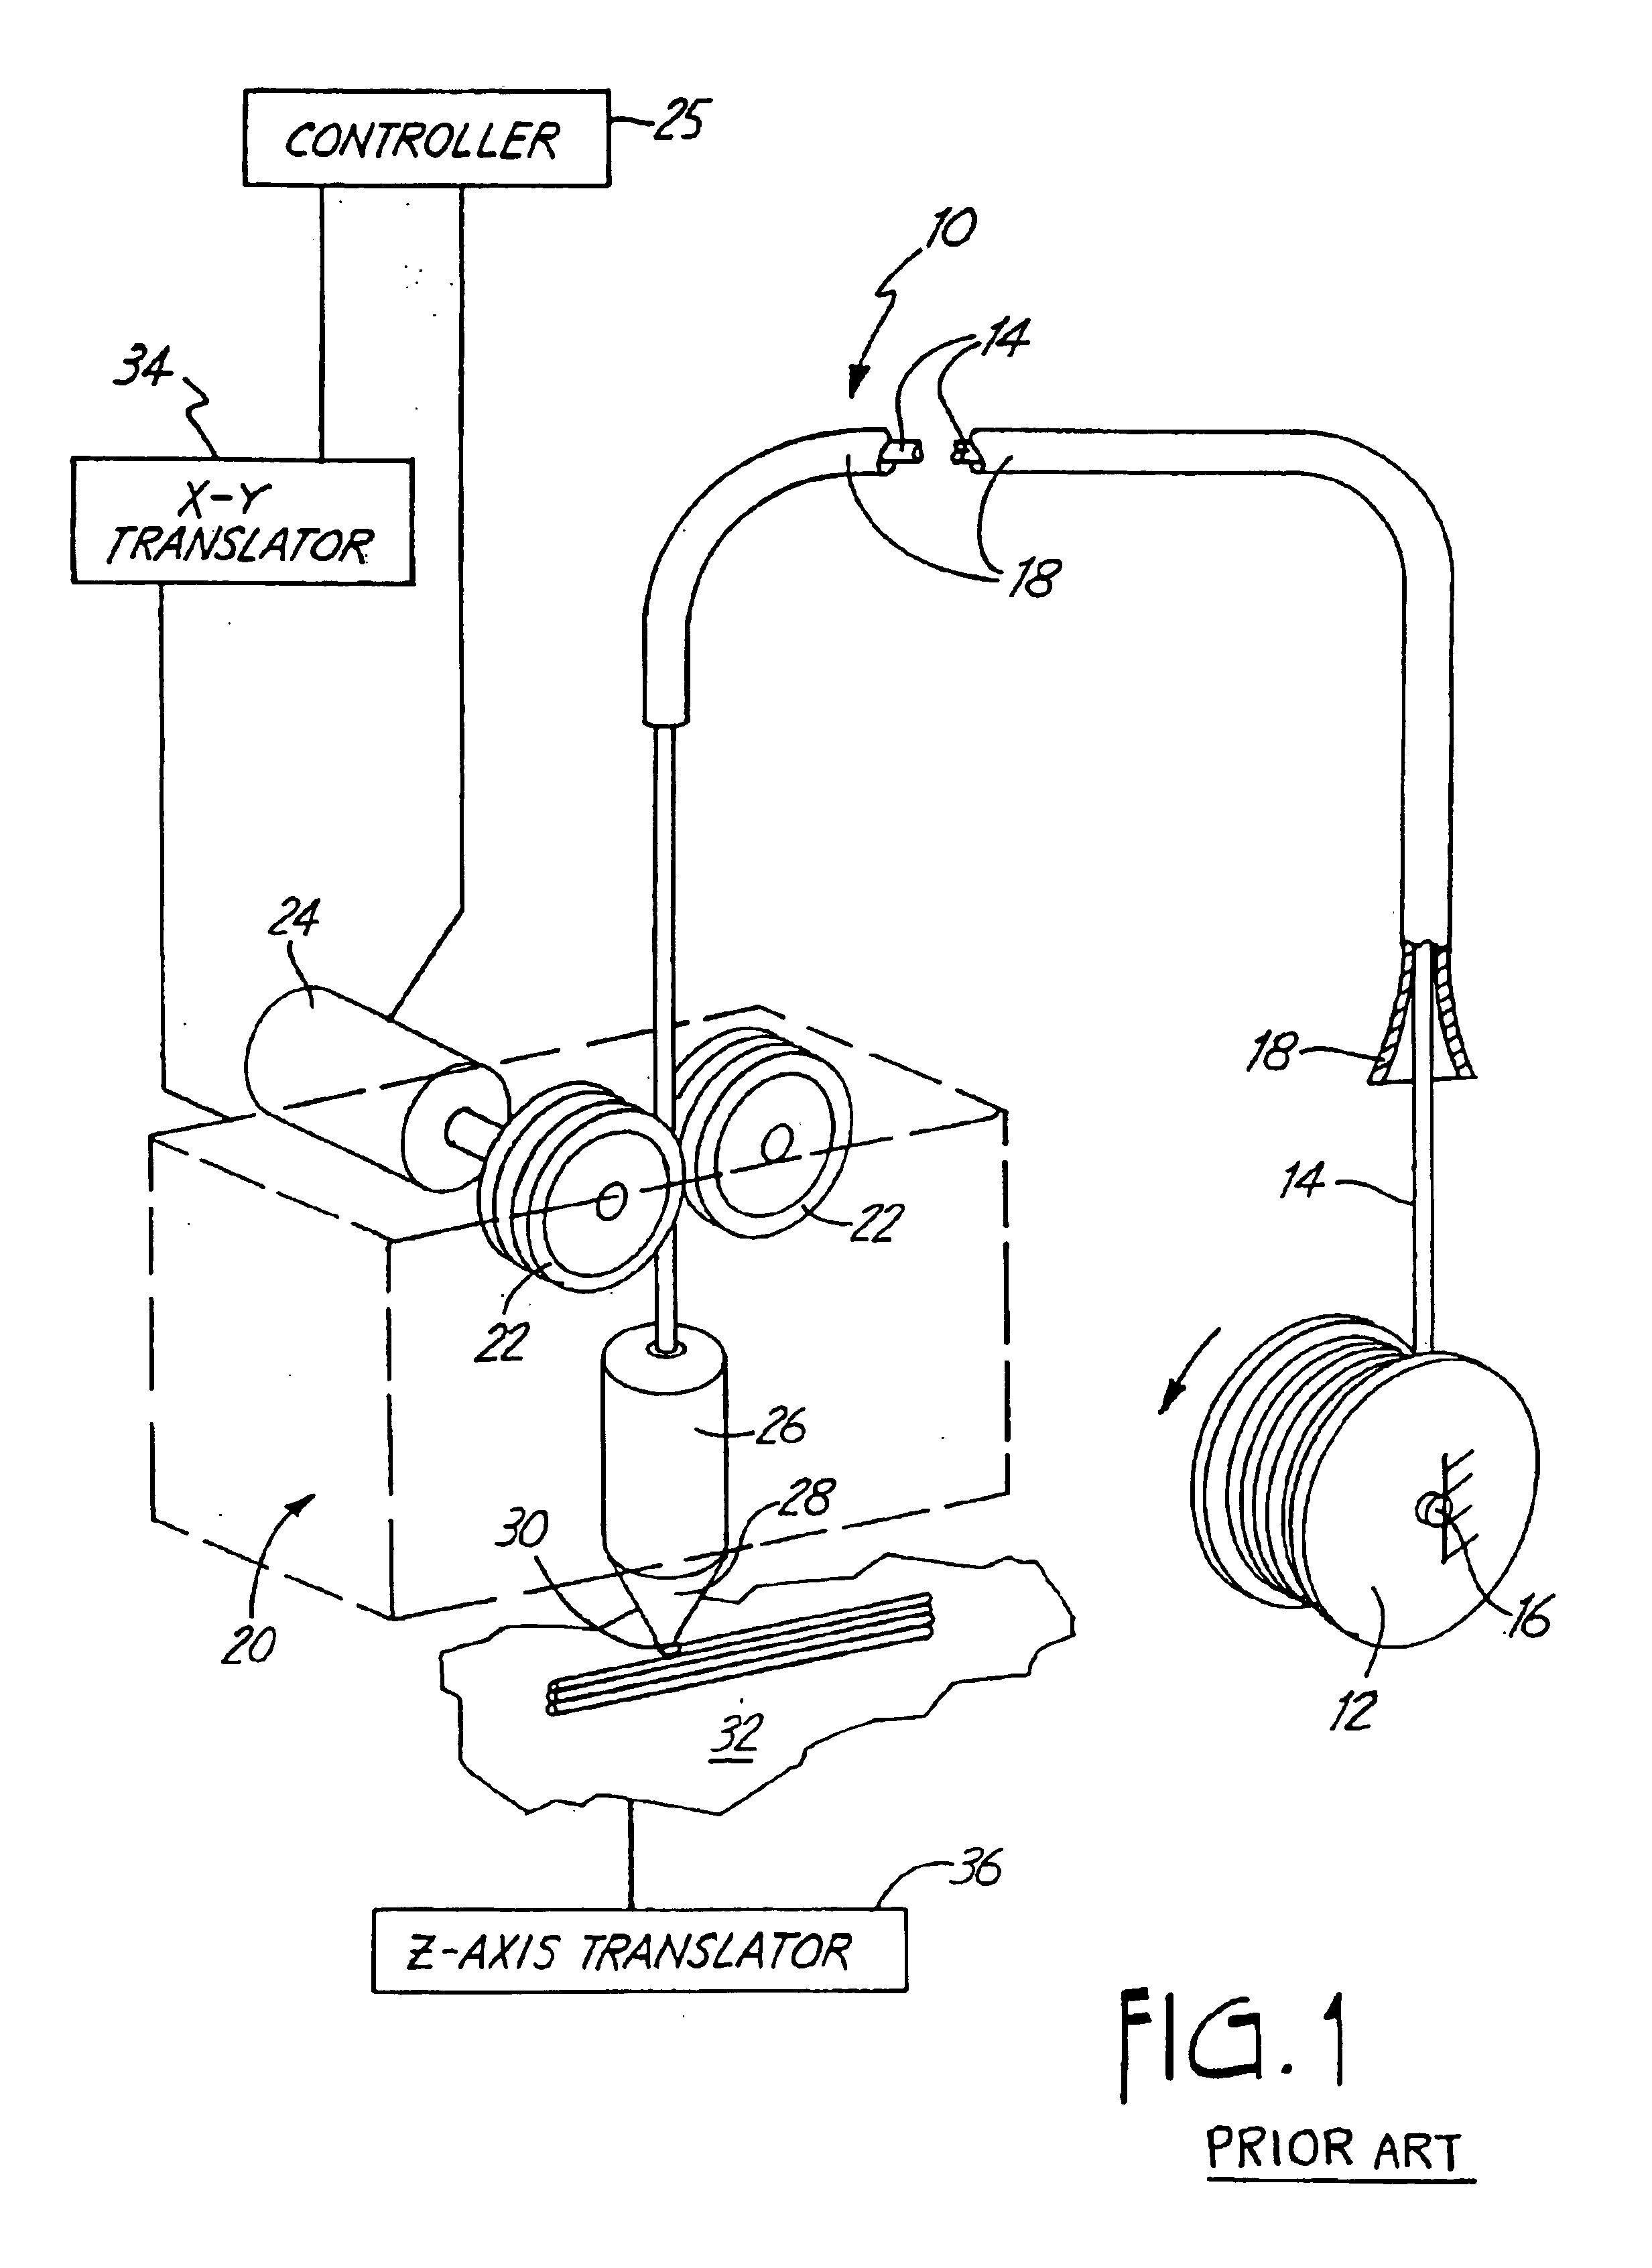 Filament loading system in an extrusion apparatus